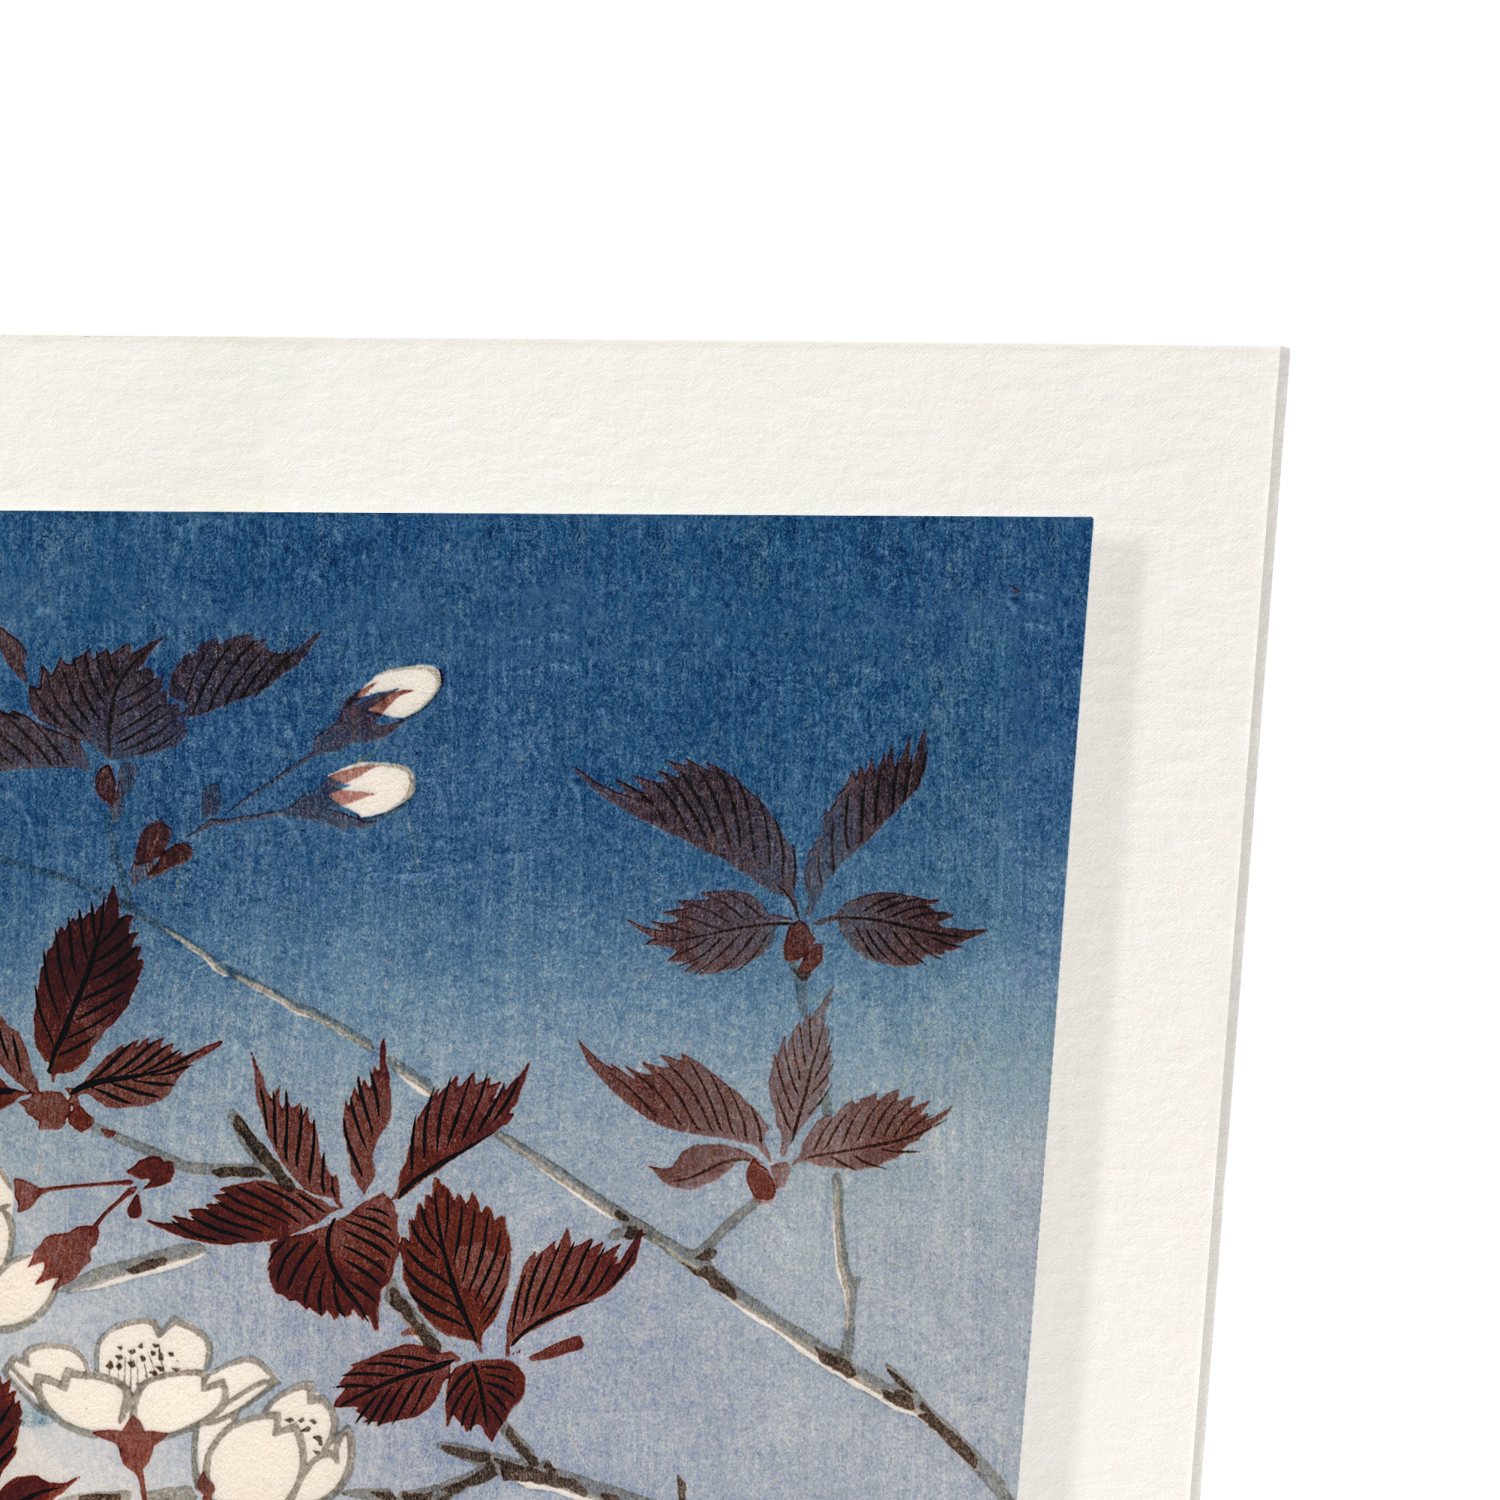 BLOSSOMS AND MOON: Japanese Art Print